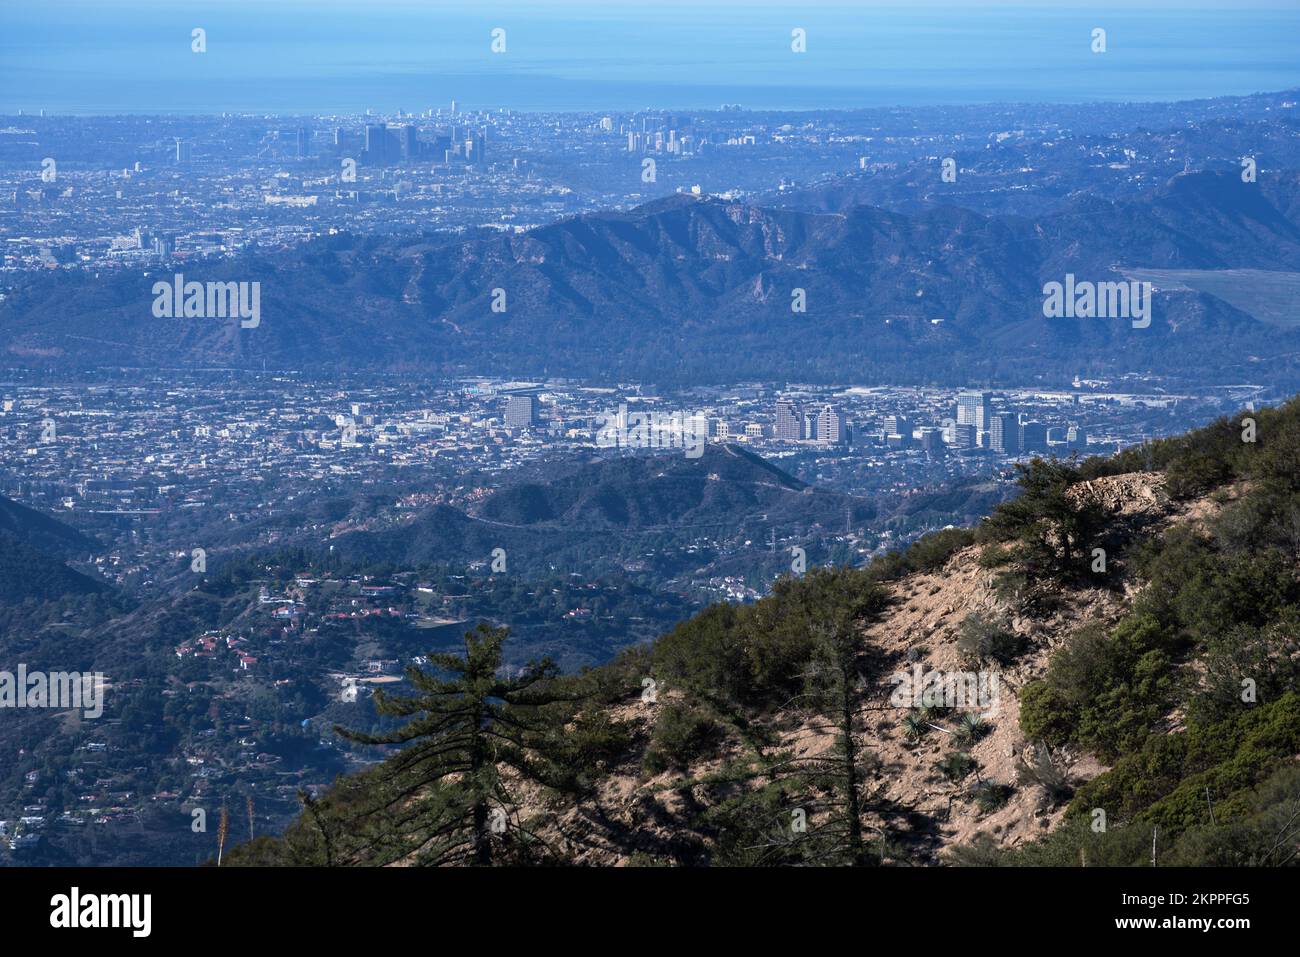 View of Glendale, Griffith Park and Century City from Mt Lowe in the Angeles National Forest and San Gabriel Mountains area of Los Angeles County, Cal Stock Photo